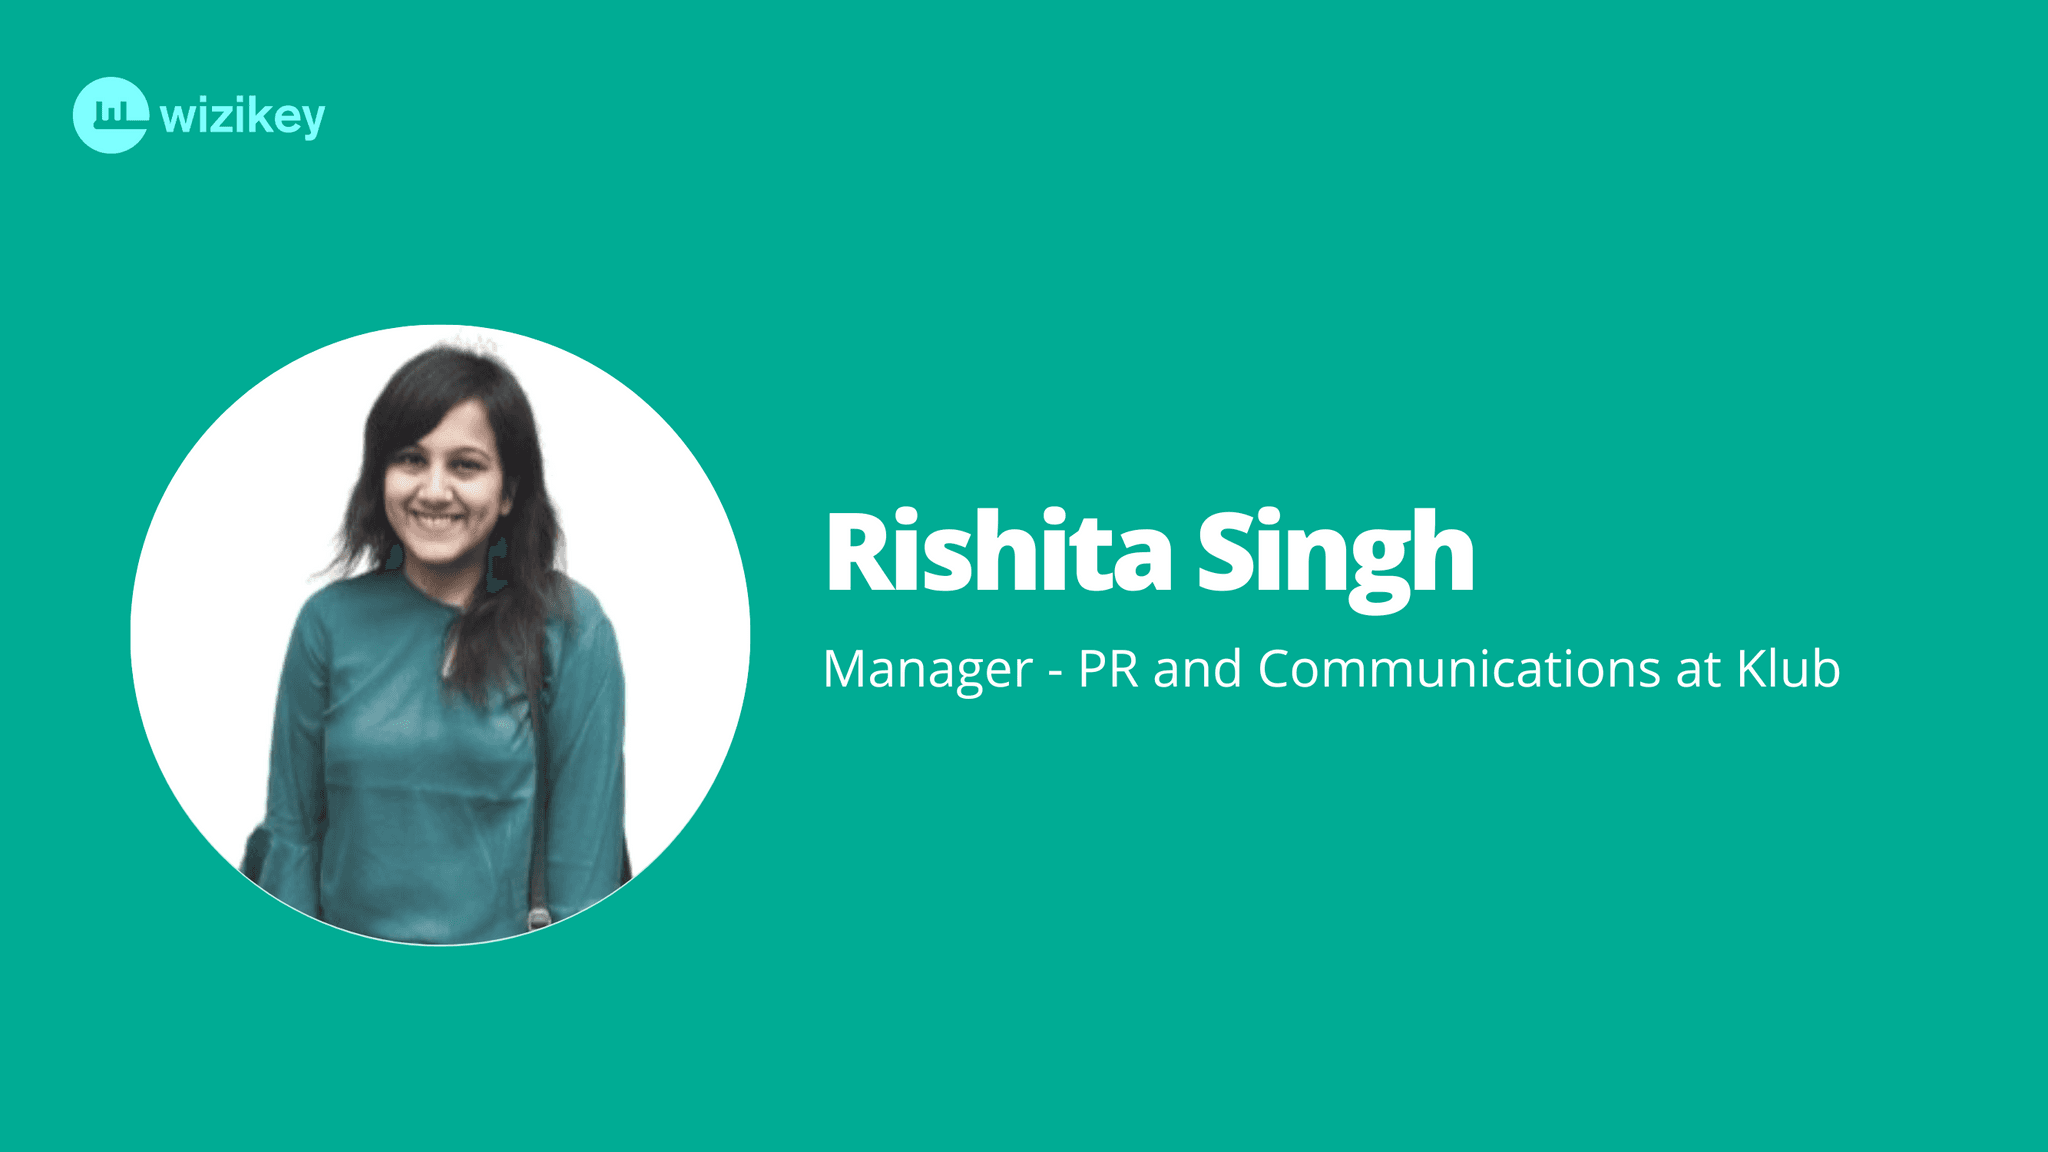 “Extract valuable untold stories from your company’s gold mine of data by analyzing datasets and Excel sheets-the effort is worth the reward. “-Rishita from Klub